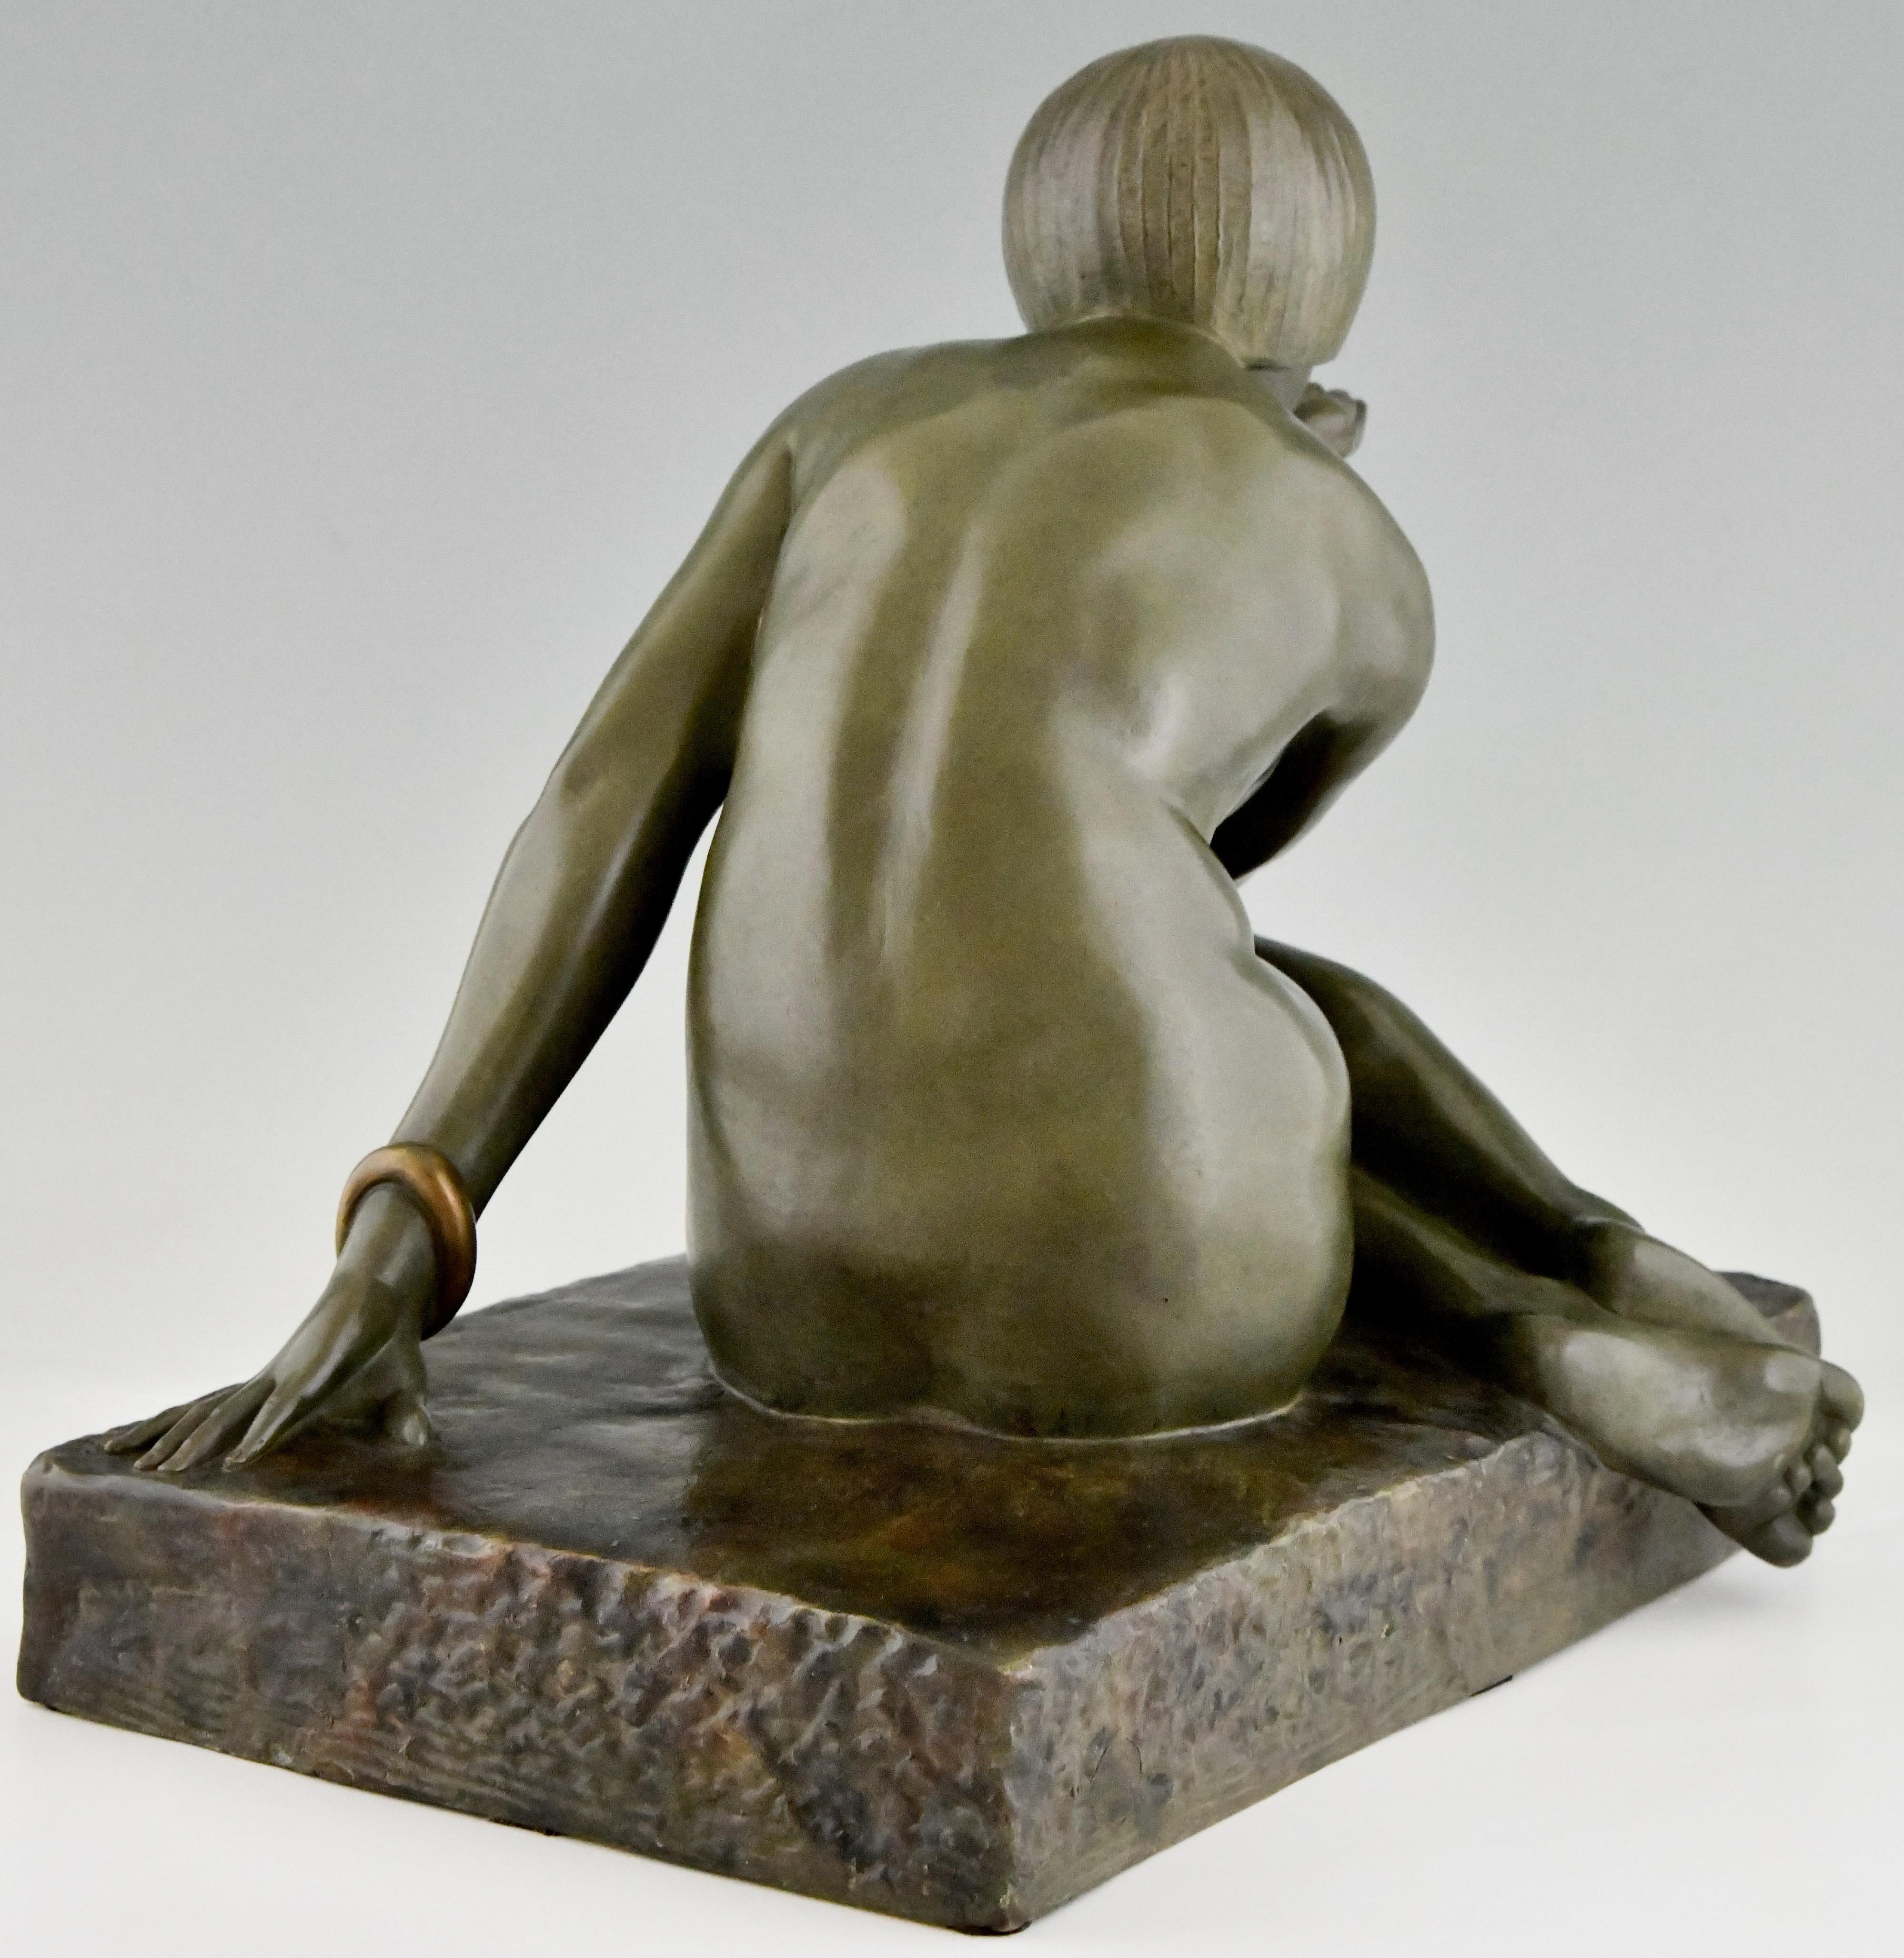 Patinated Enigma Art Deco bronze sculpture seated nude with bracelet by Guiraud Rivière